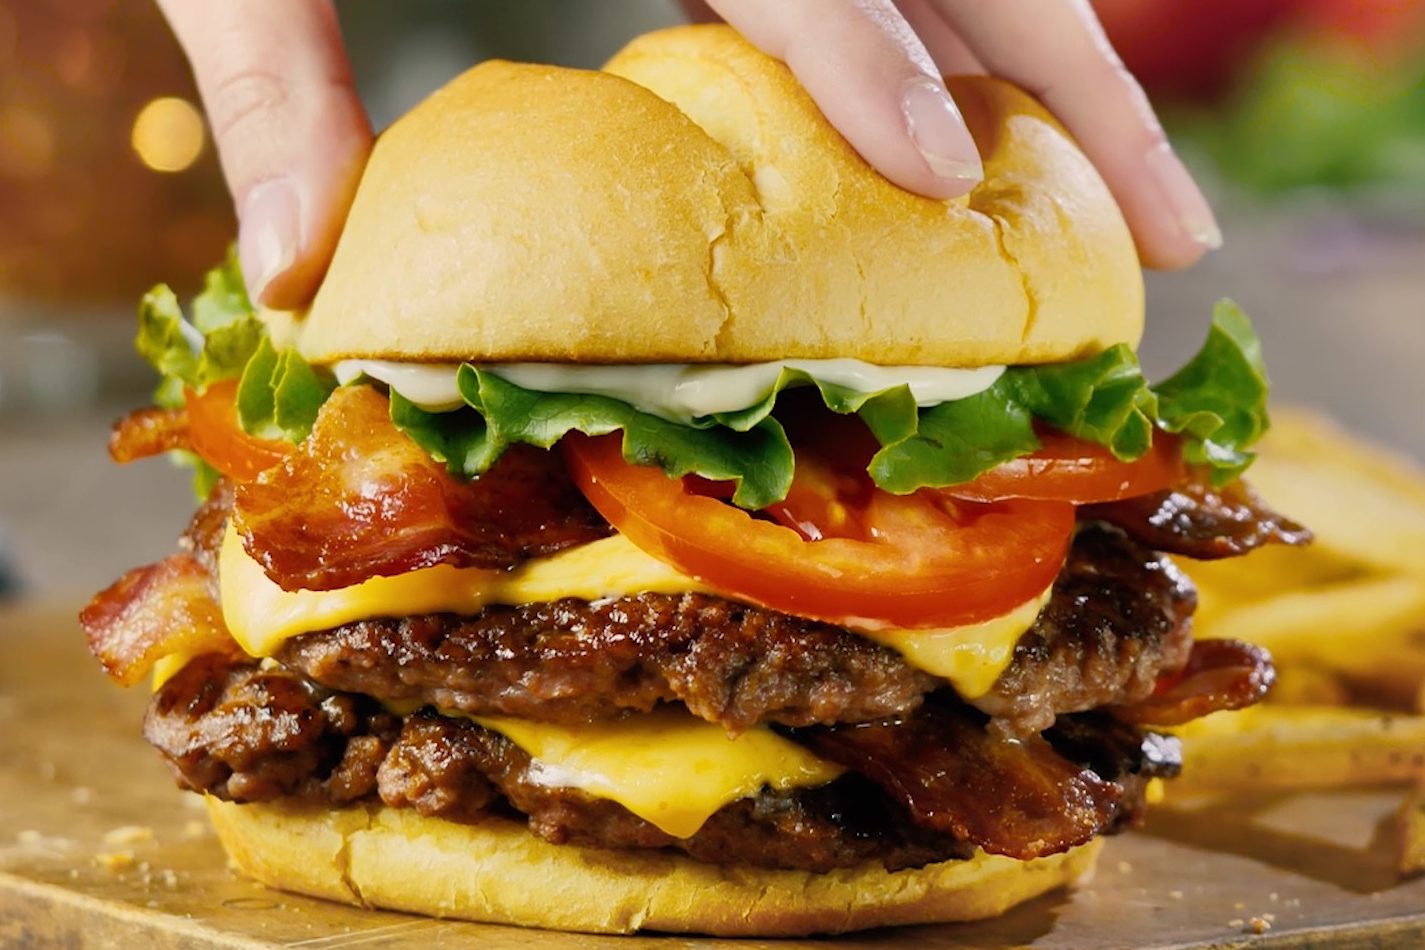 The patties of smash burgers have been pounded or “smashed” until they’re super thin